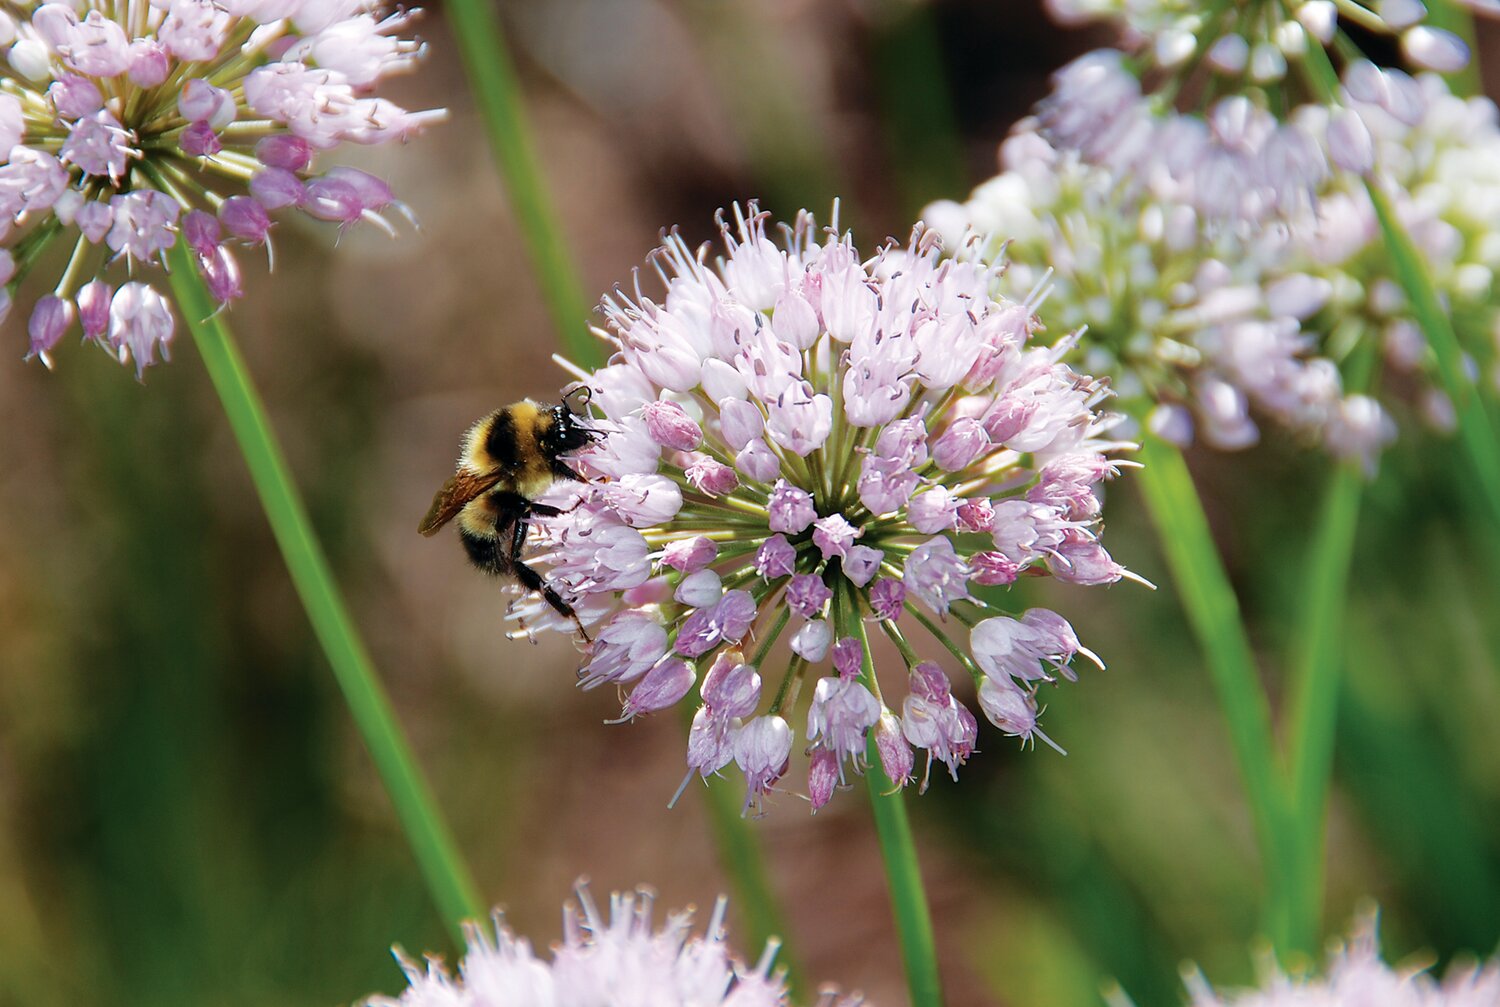 A bee lands on an allium. When preparing your garden for spring, leave some sunny spots bare for ground-nesting bees, which benefit gardens.